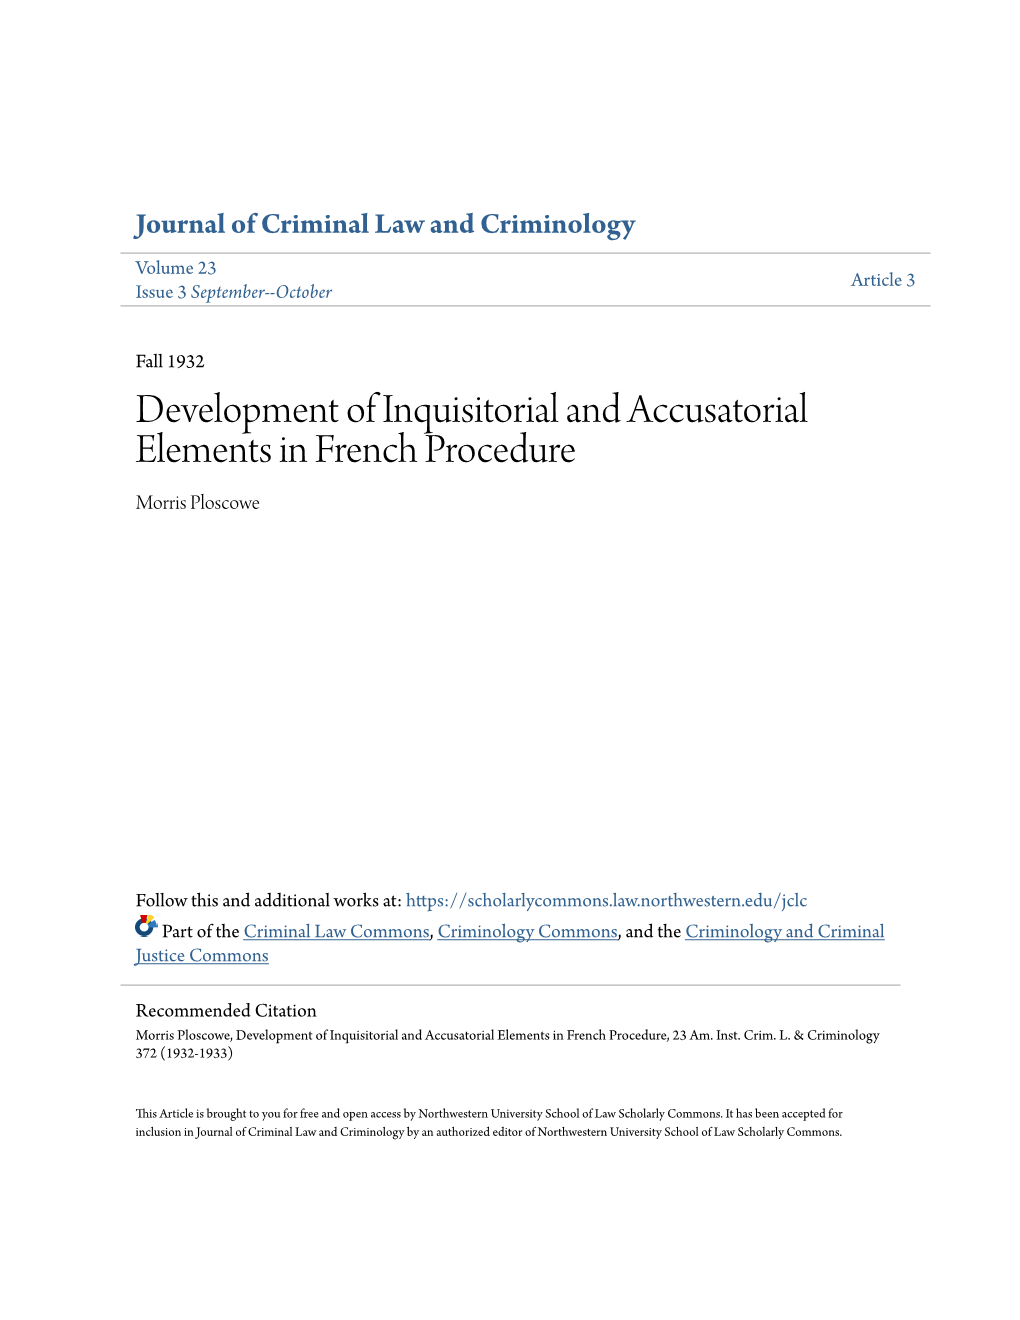 Development of Inquisitorial and Accusatorial Elements in French Procedure Morris Ploscowe